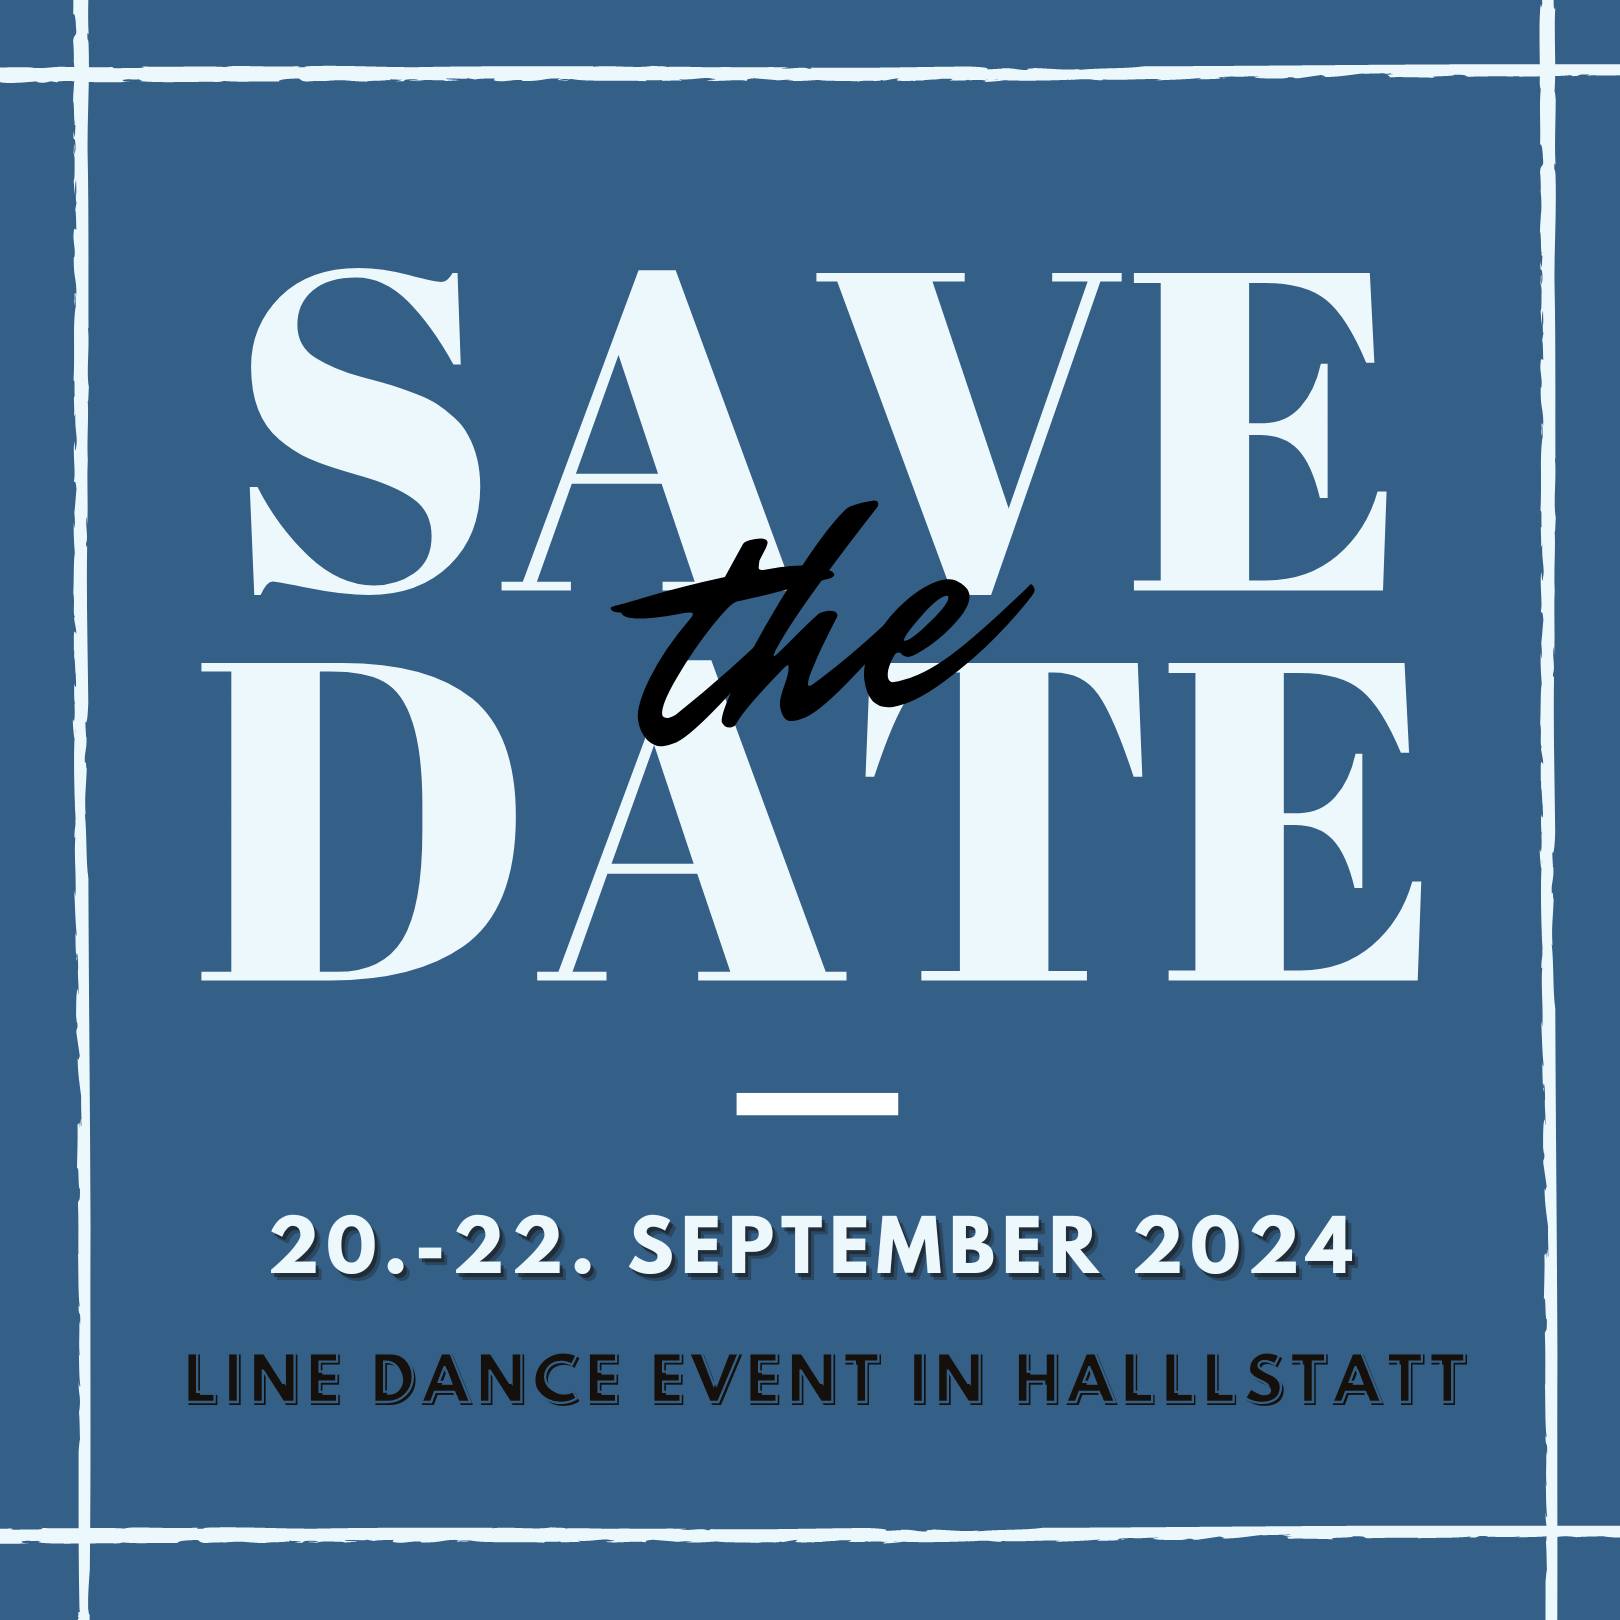 Save the Date 20.-22.9.2022